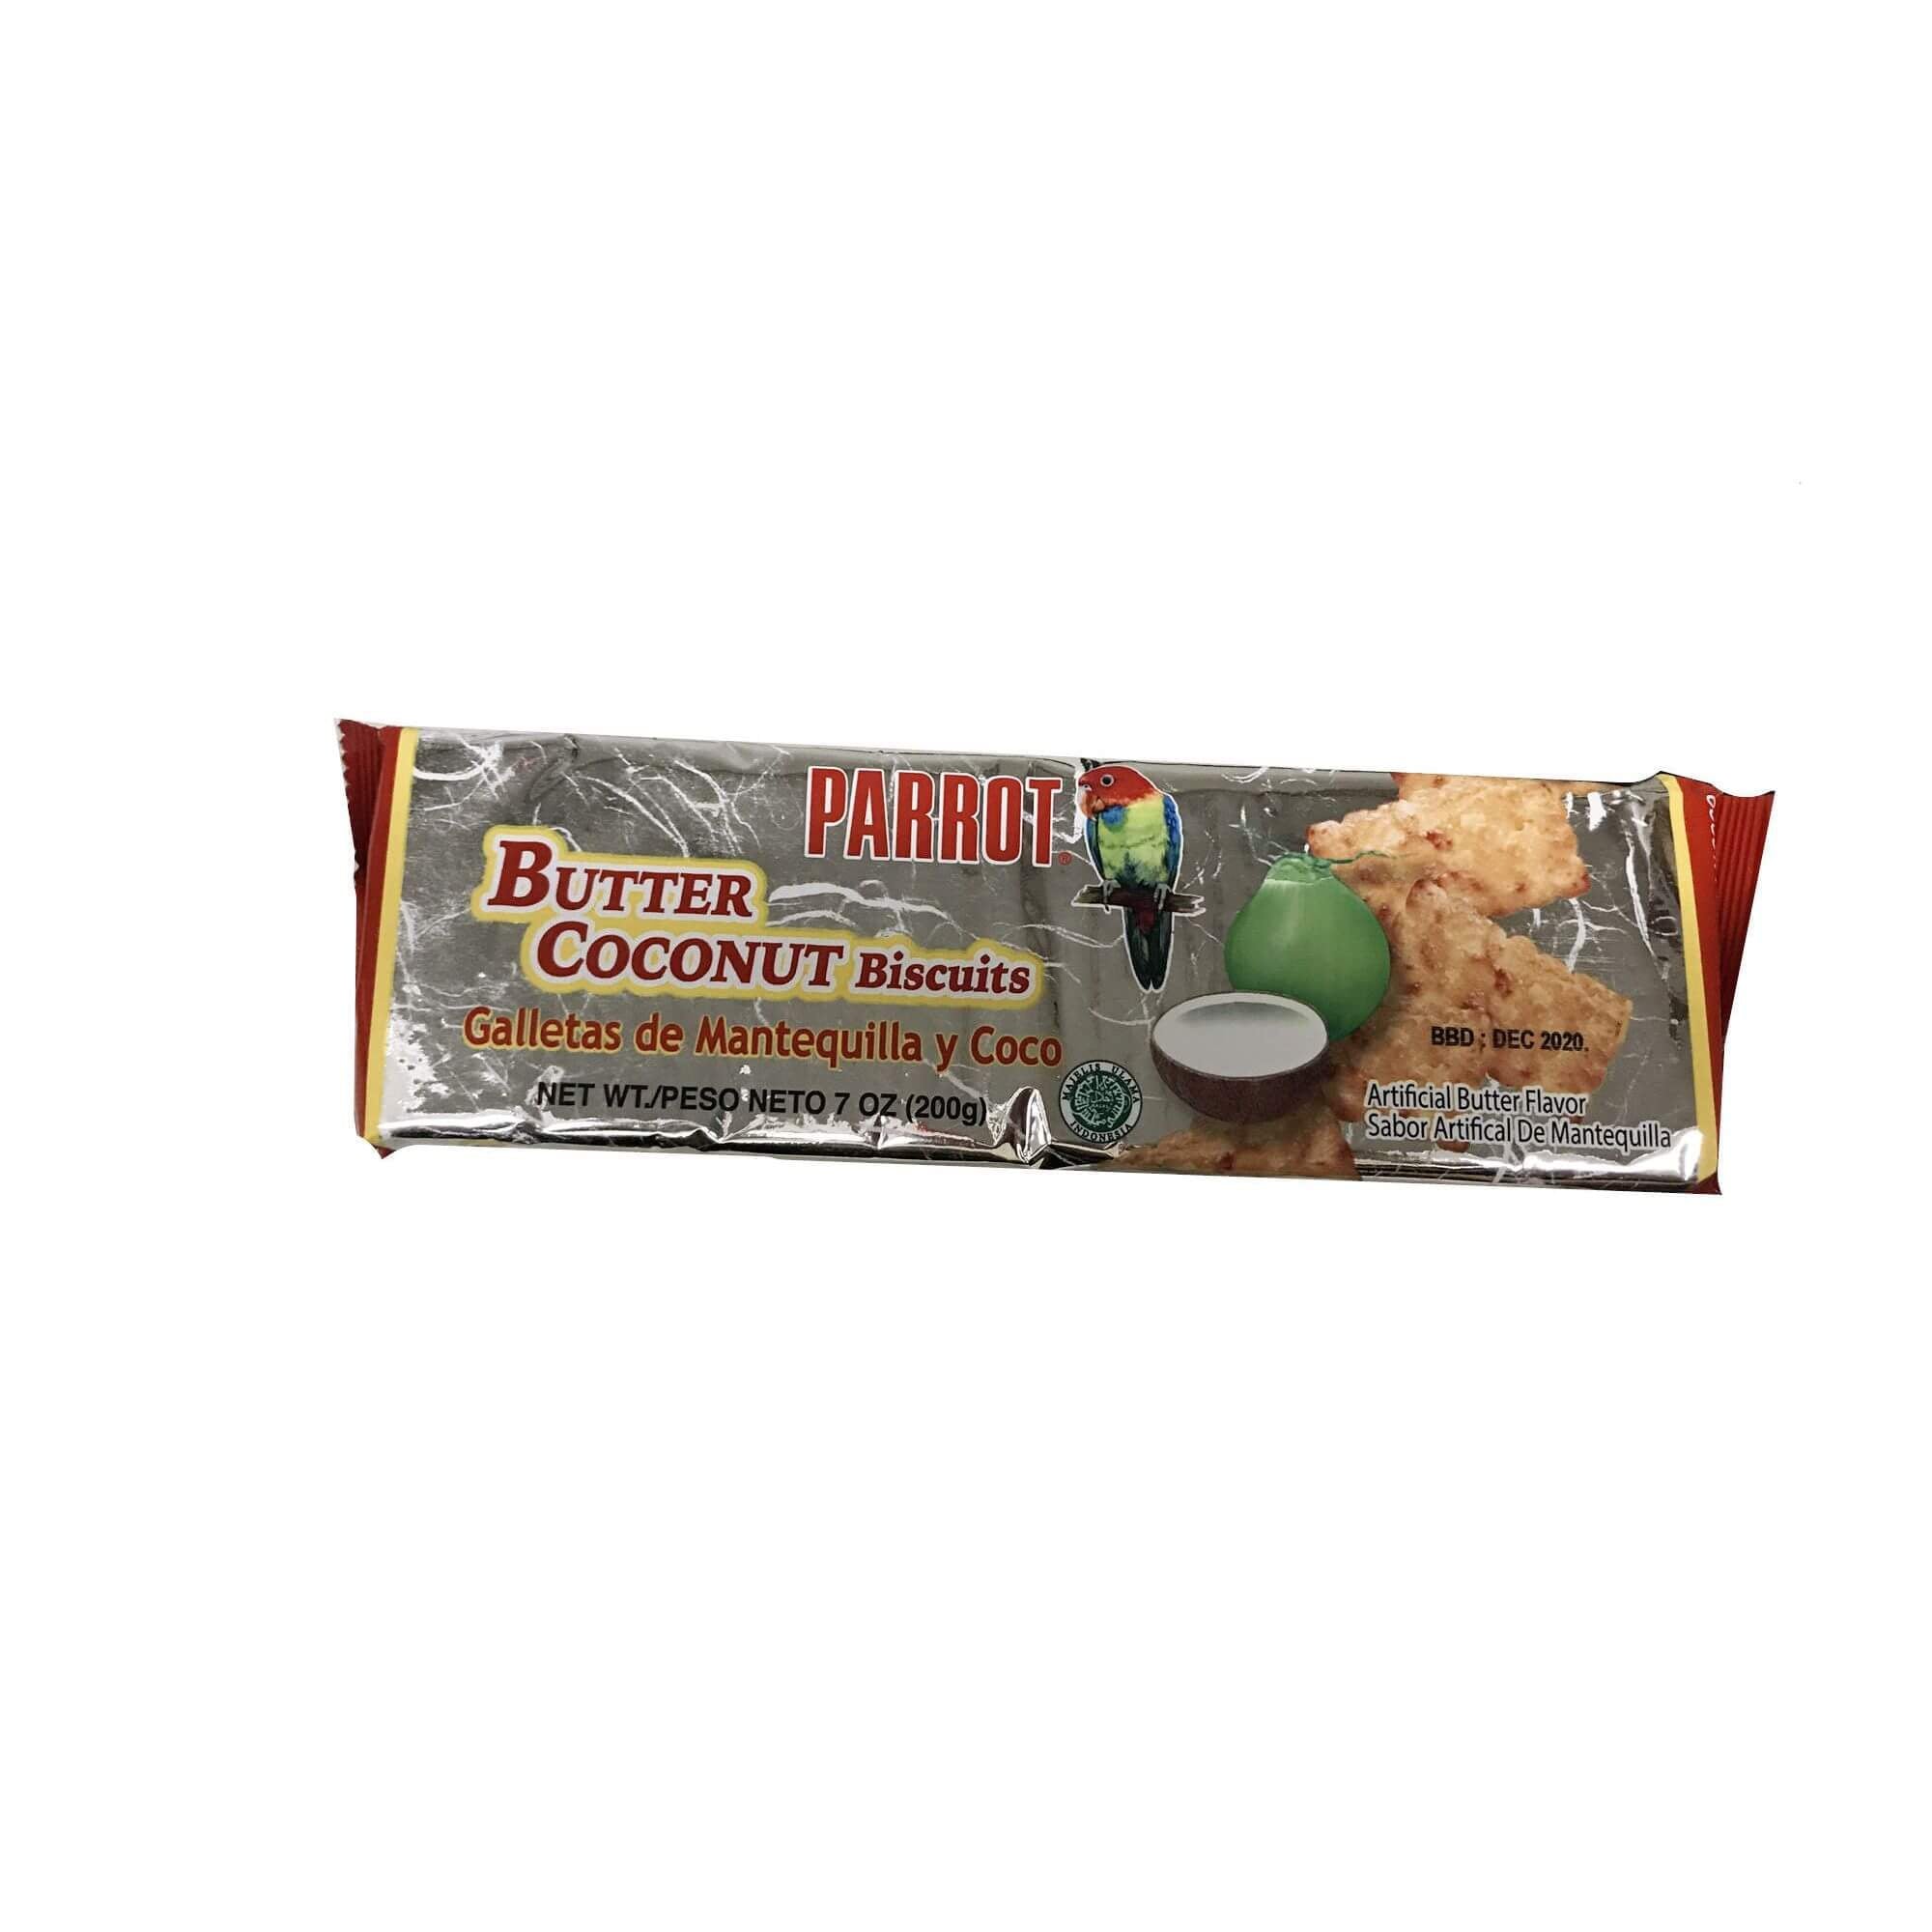 Parrot Butter Coconut Biscuits - 200g/7oz